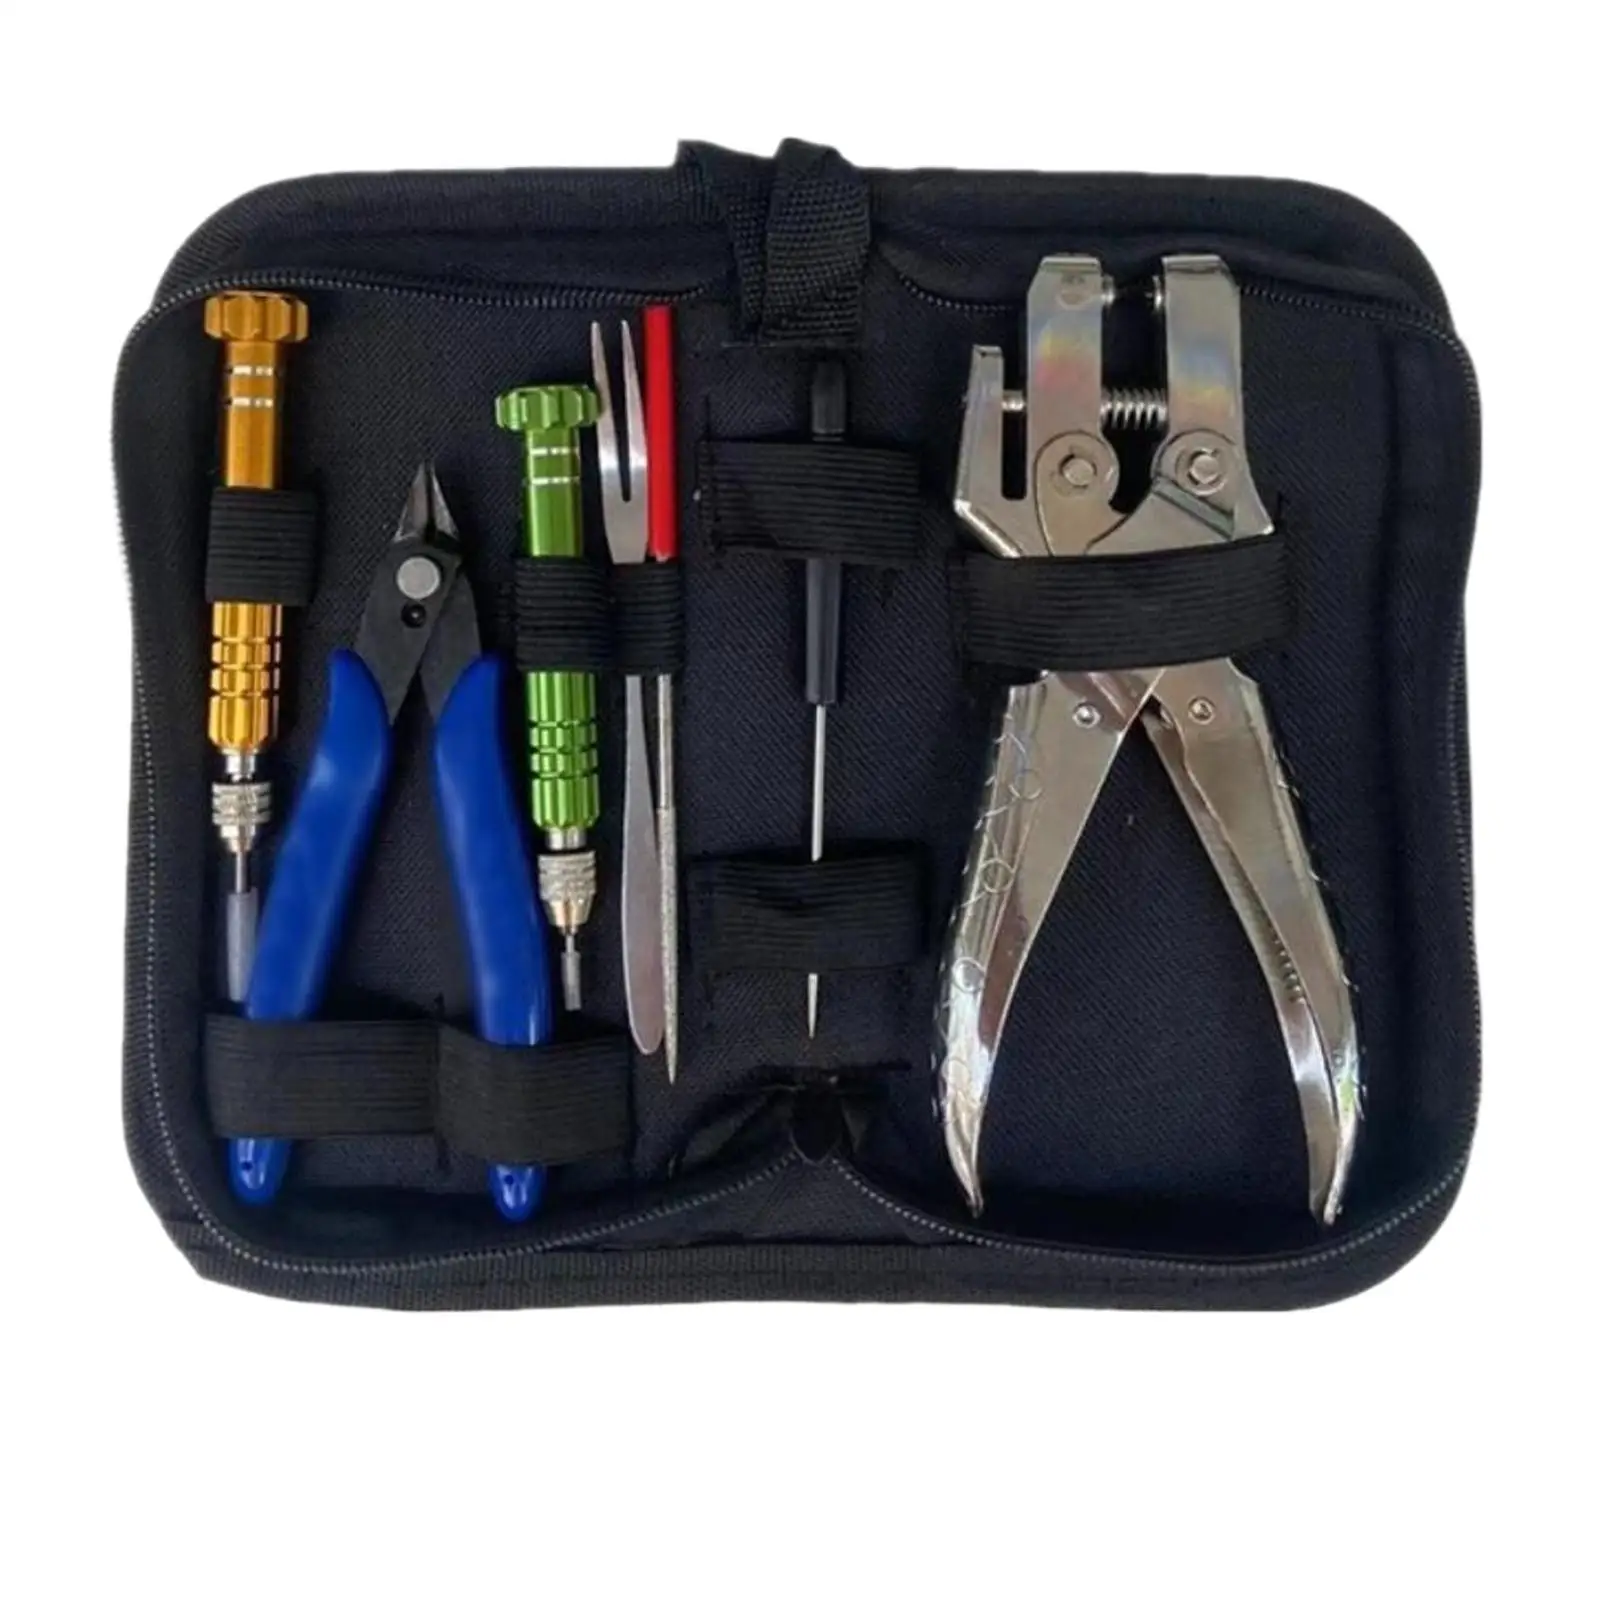 Starting Stringing Clamp Tool Kit, Badminton Racket Plier for Accessories Equipment